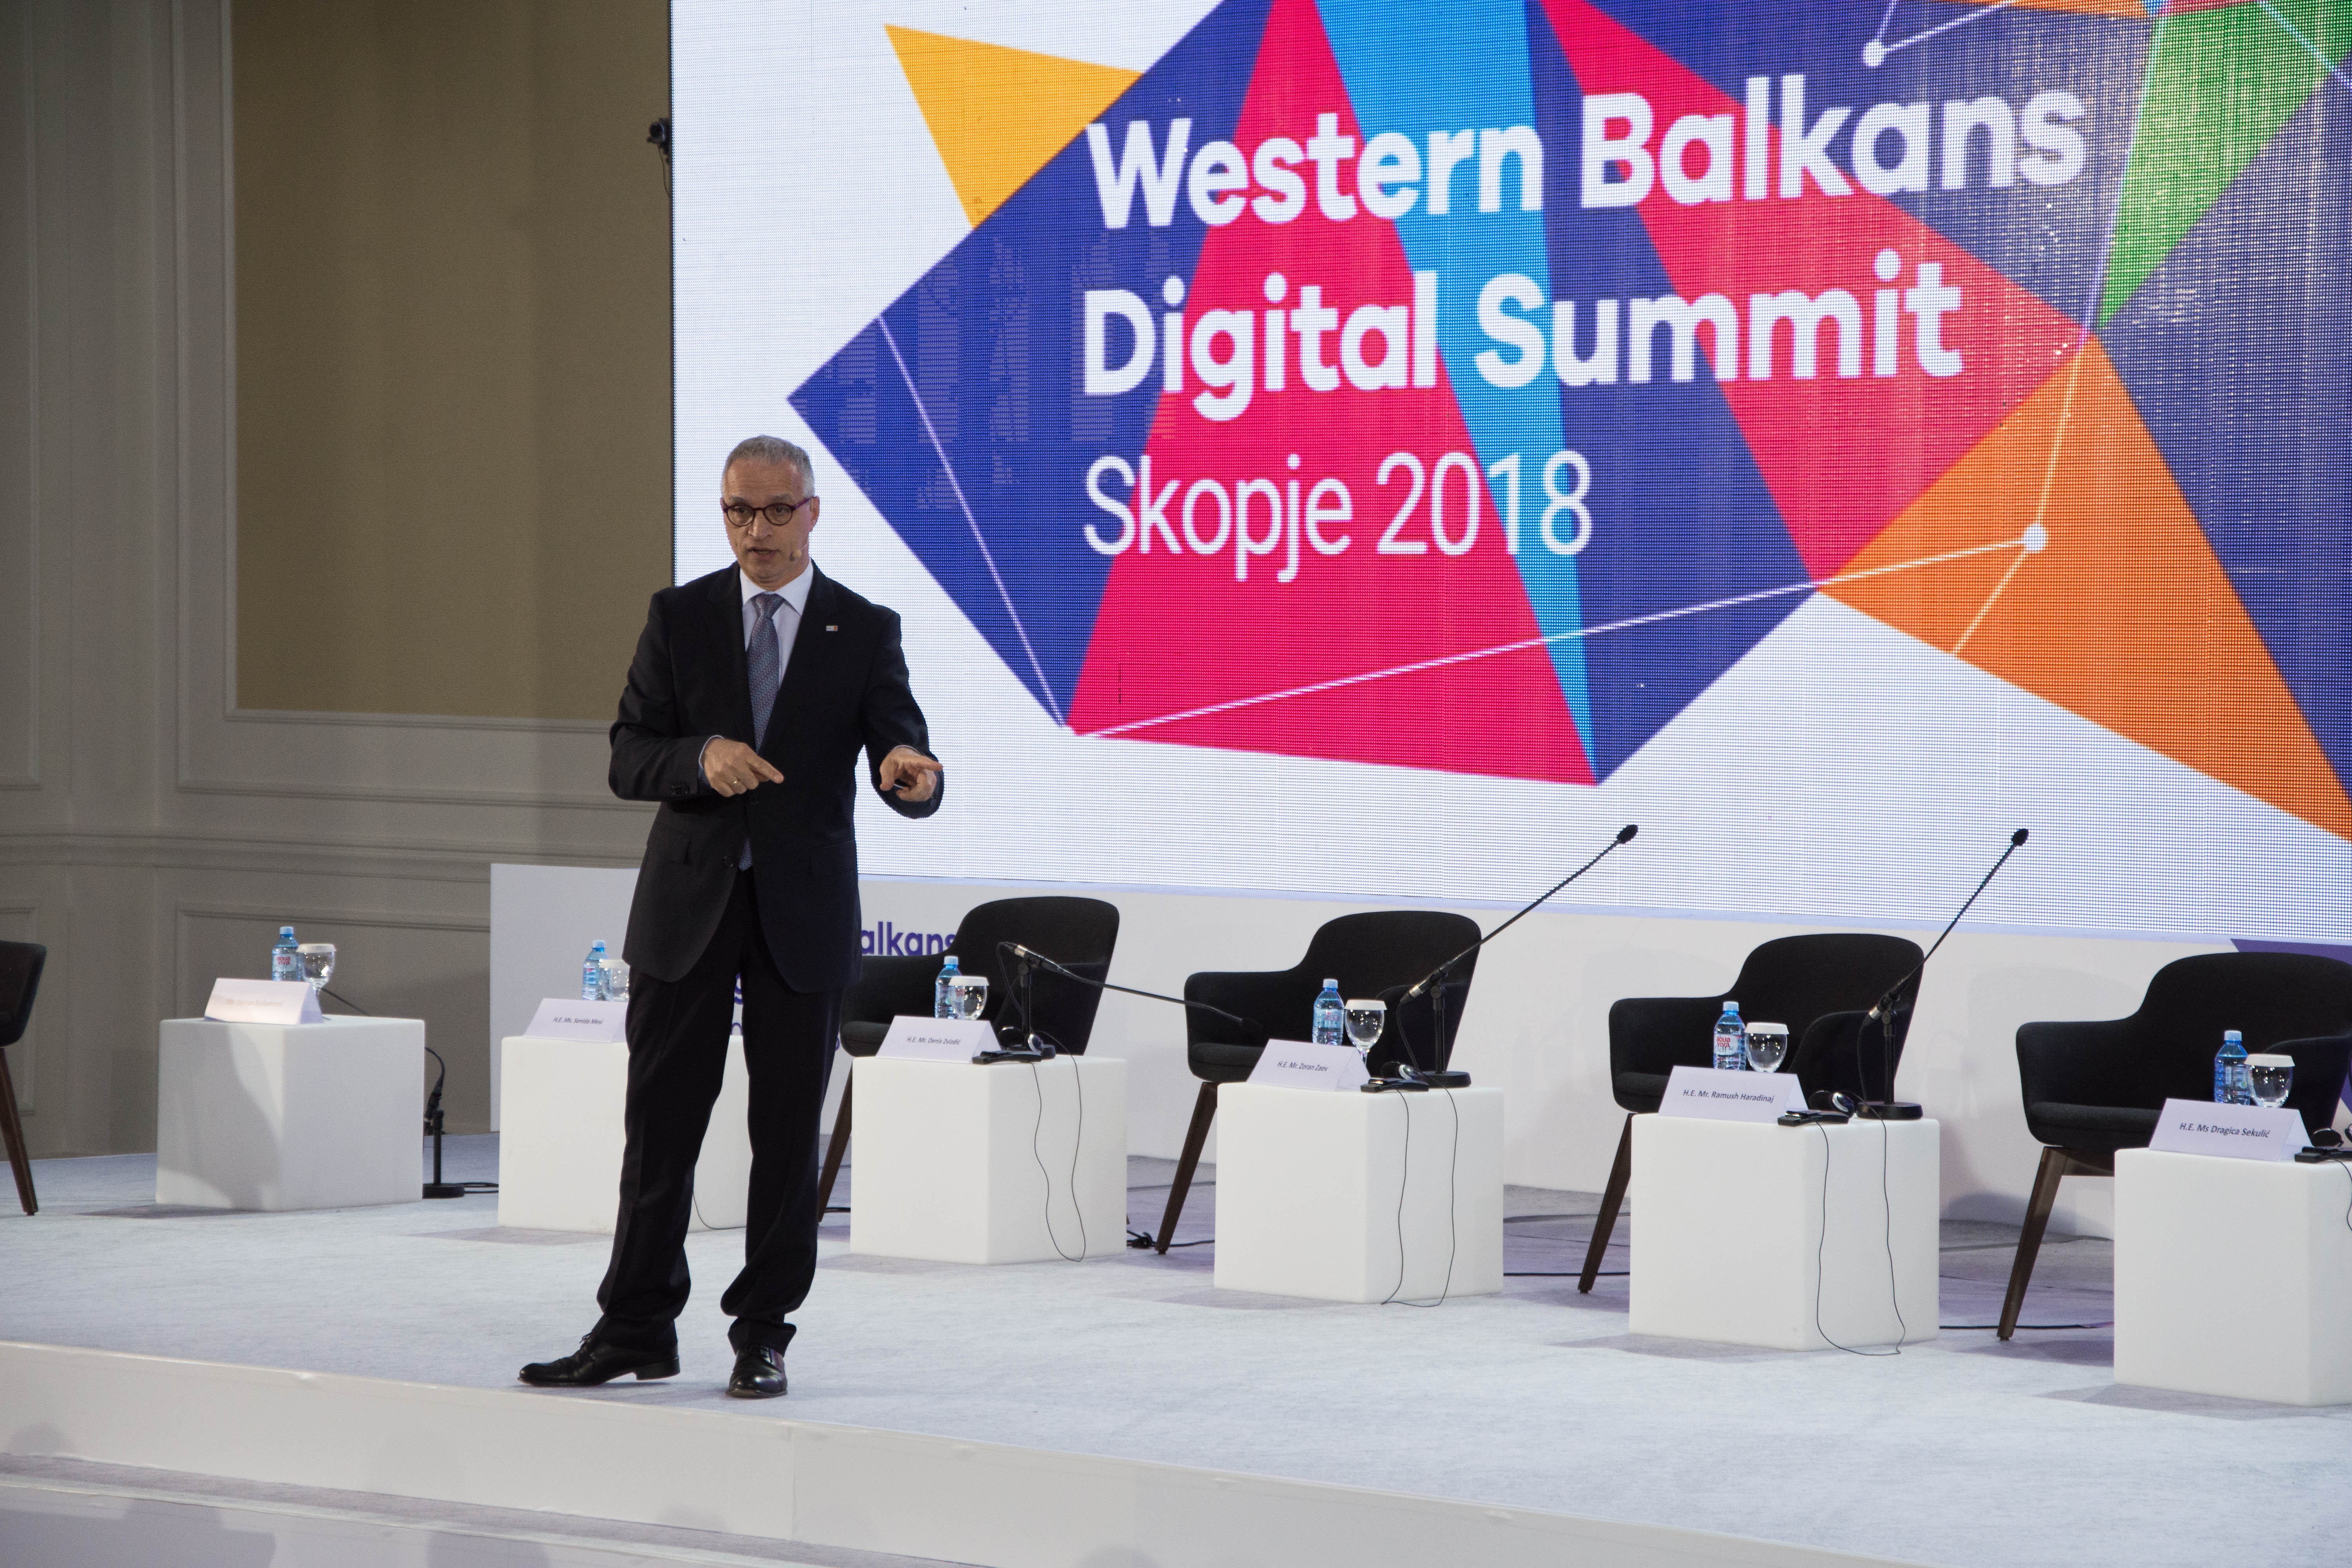 RCC Secretary General Goran Svilanovic, gives a key note speech to the WB prime ministers' panel of the first Western Balkan Digital Summit, on 18 April 2018 in Skopje. (Photo: Vedad Kamenjasevic)